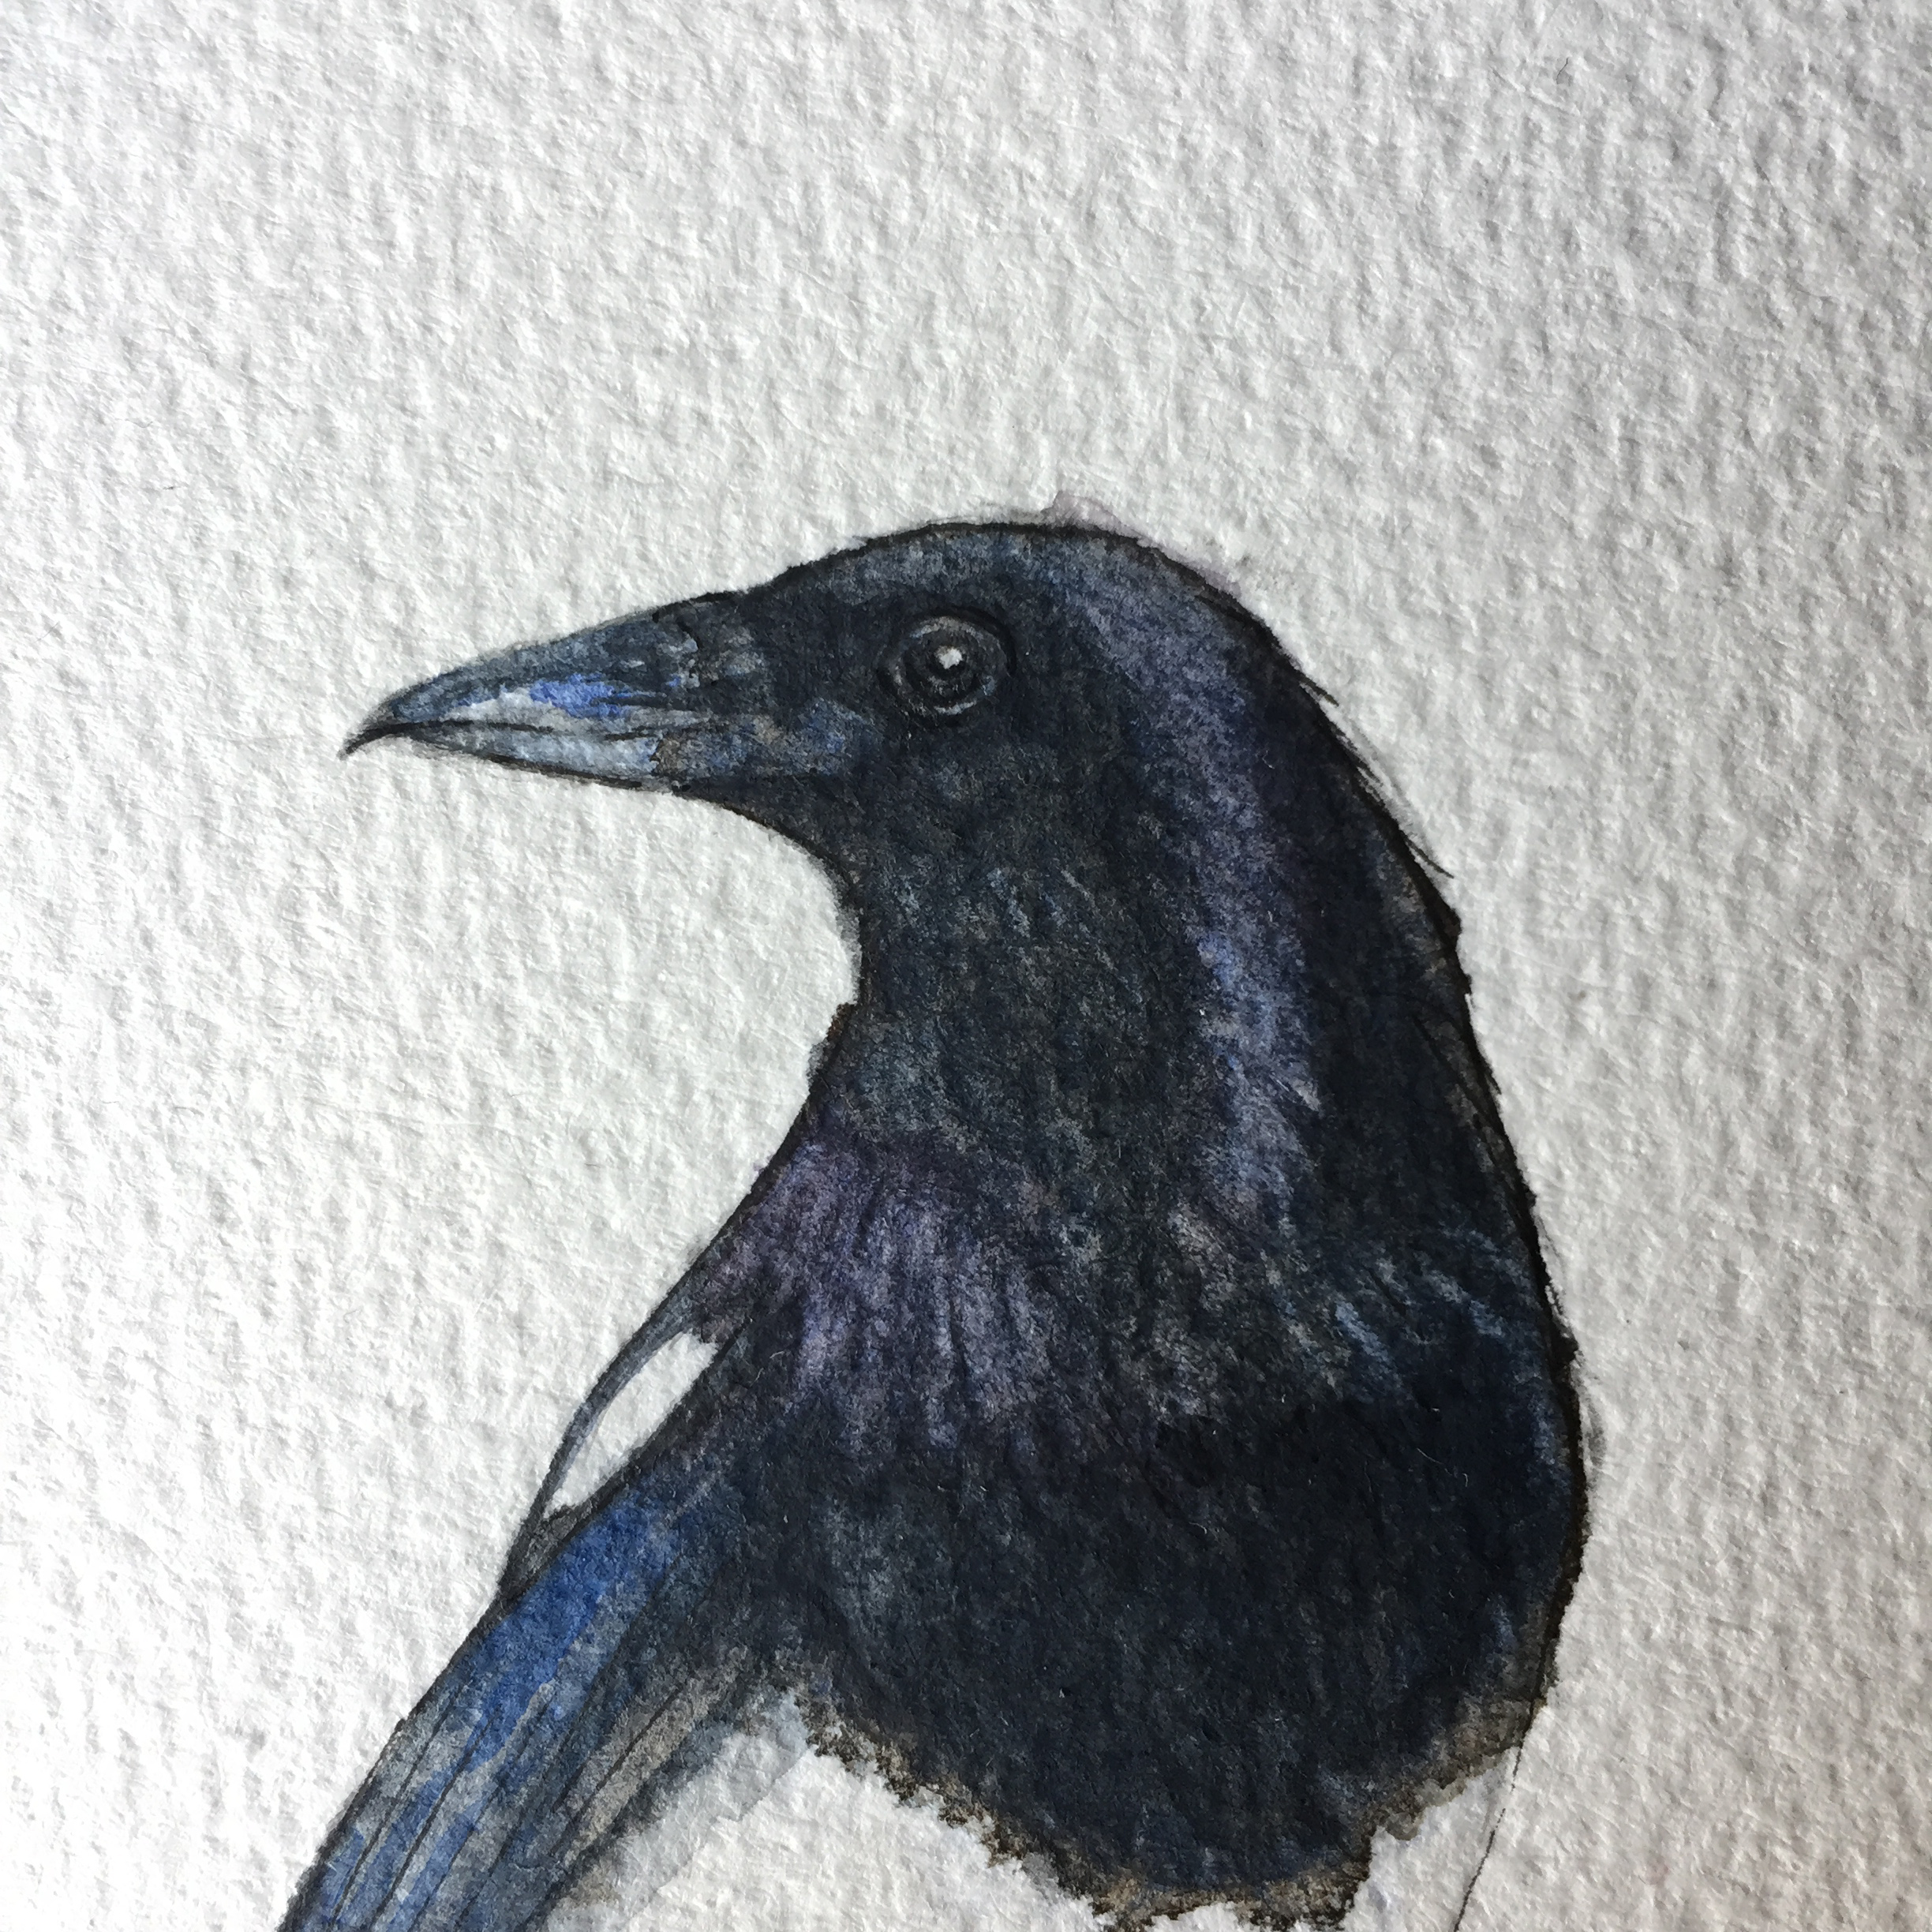 A close up of the finished magpie painting